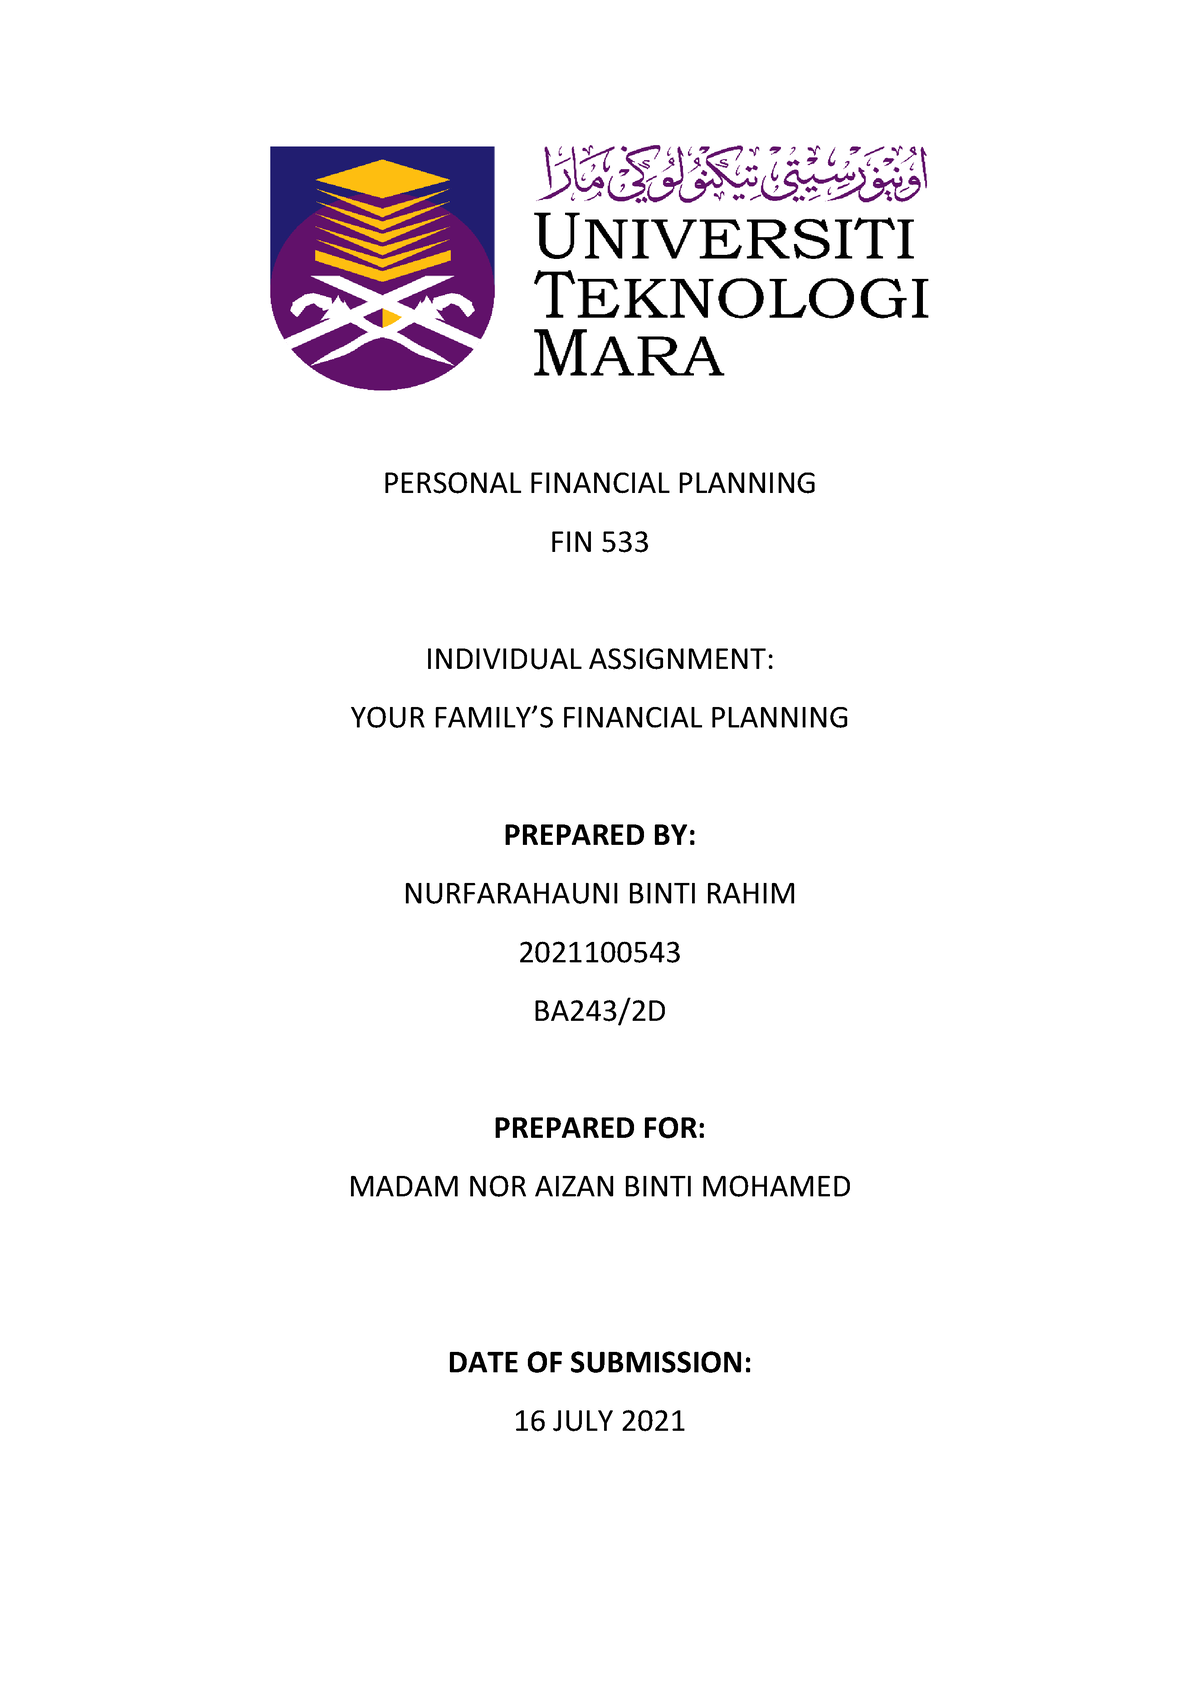 fin 533 personal financial planning assignment